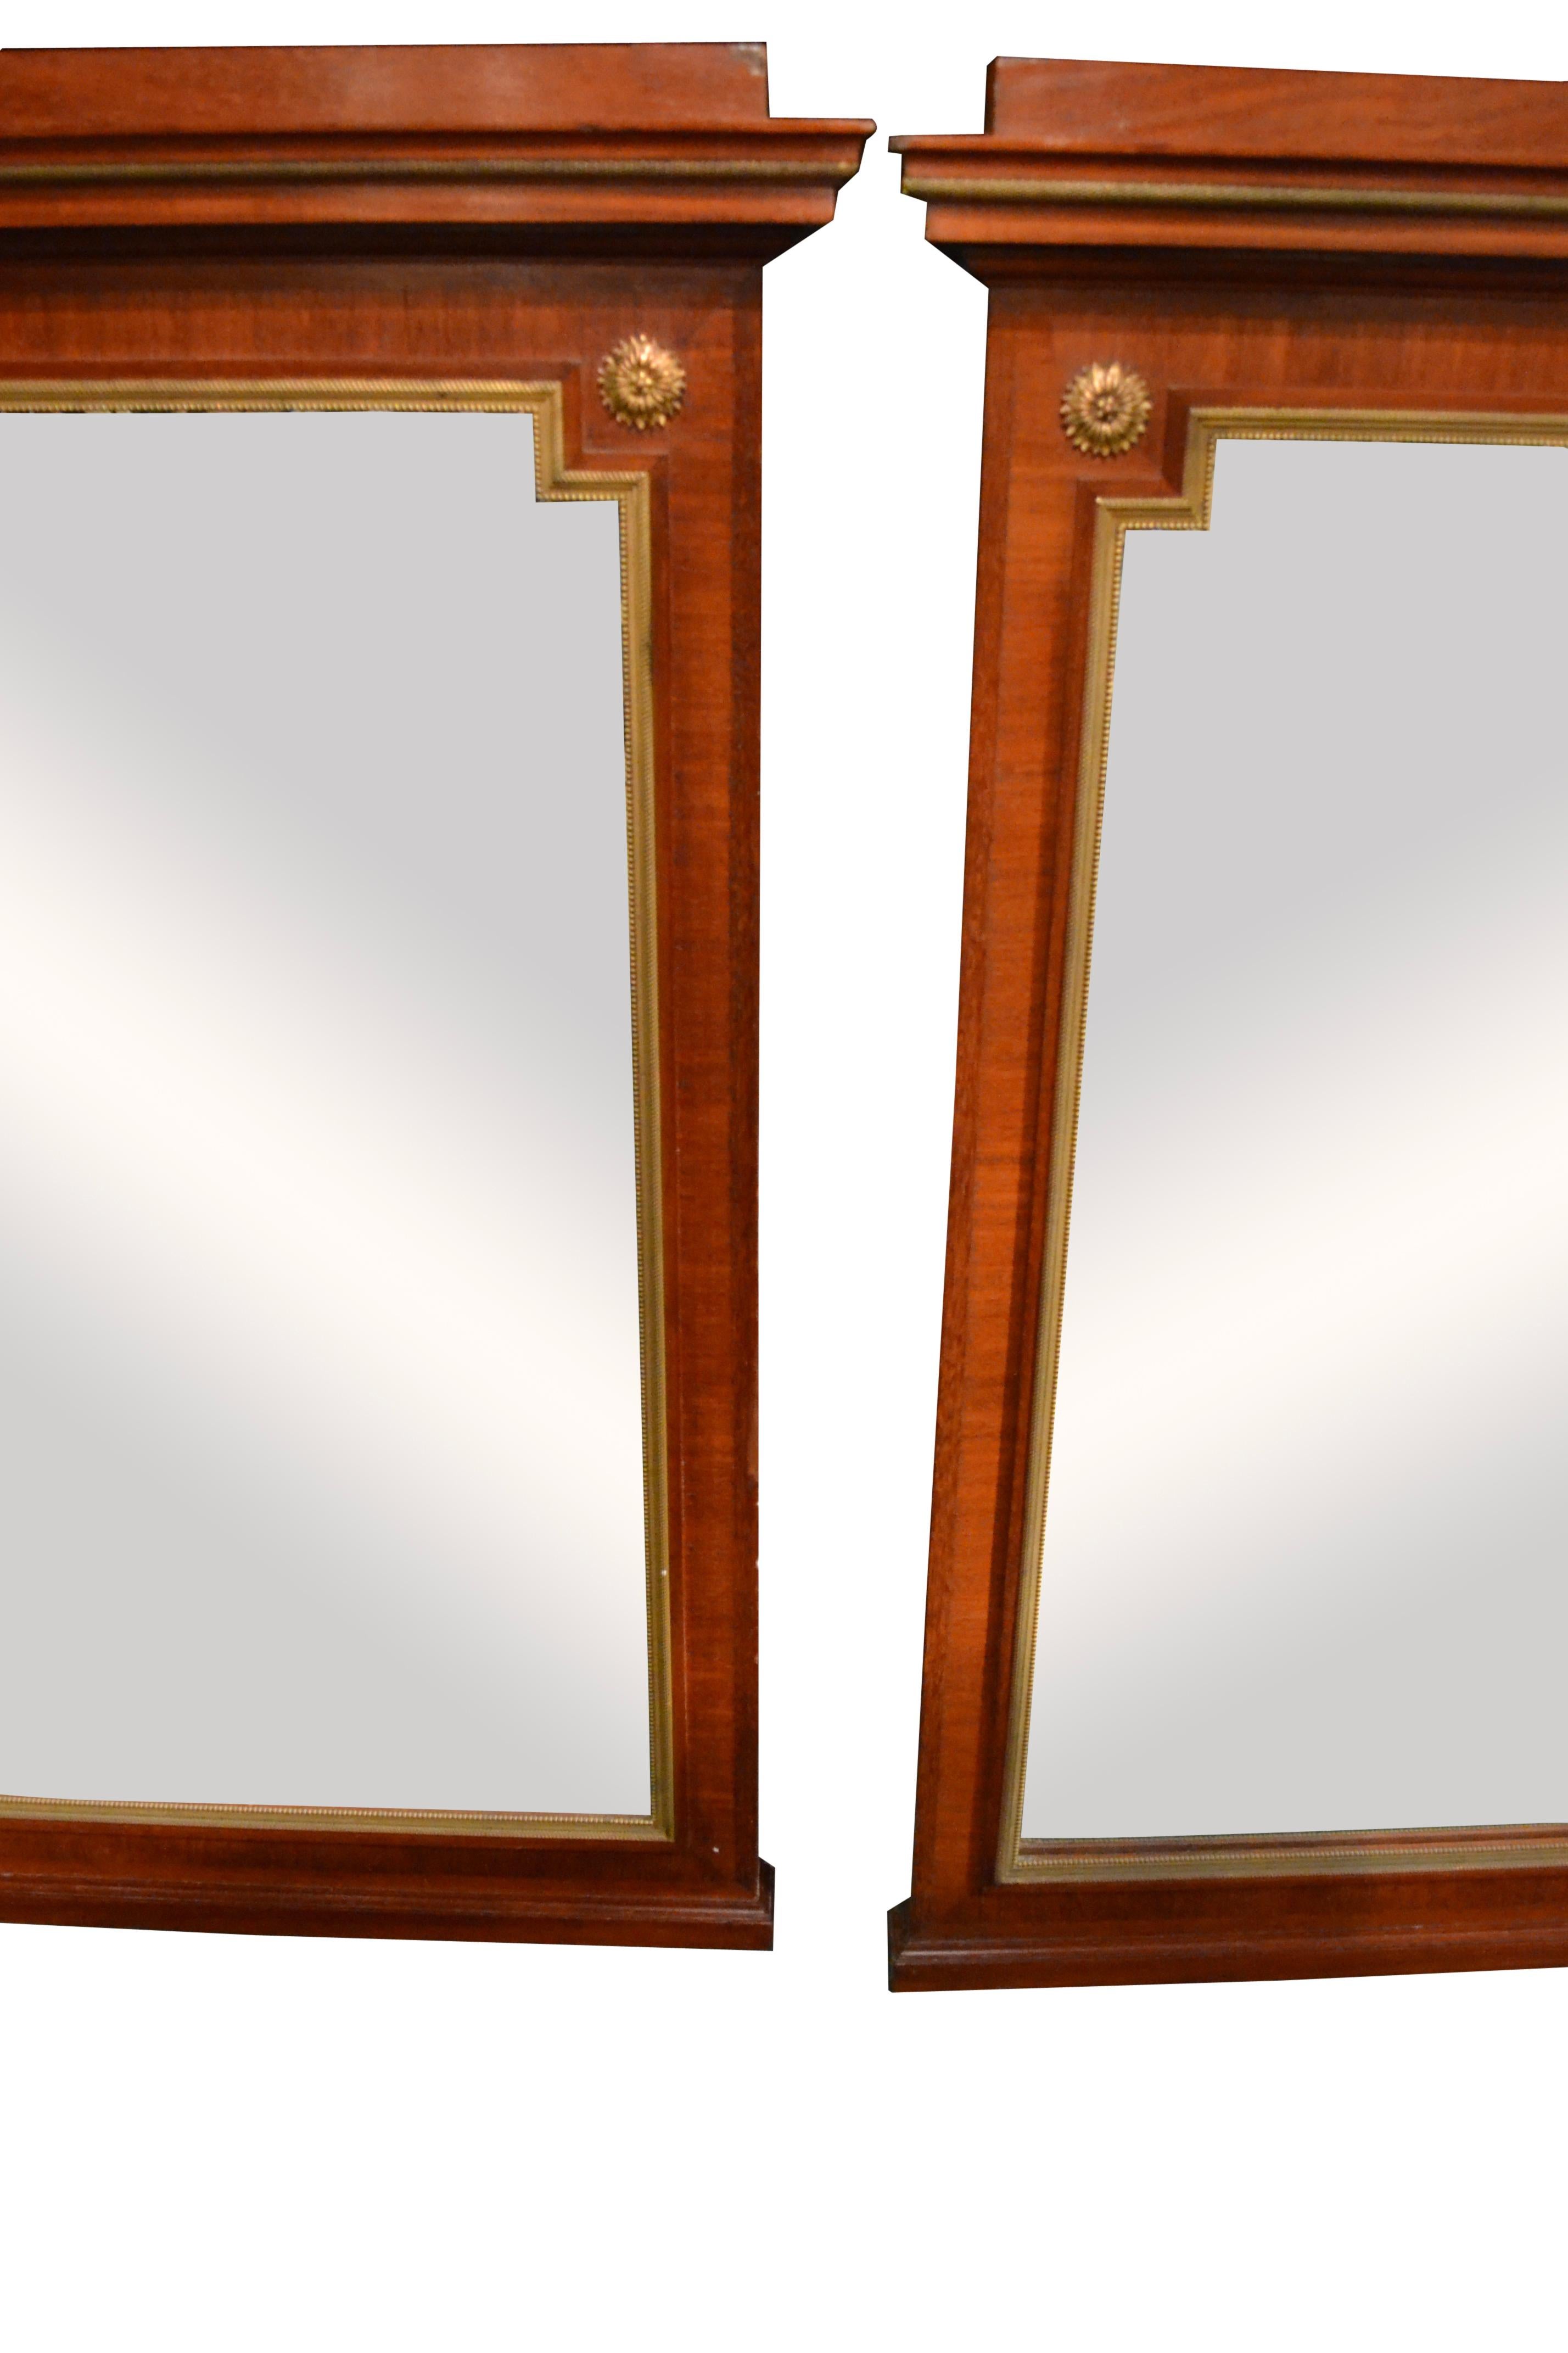 Pair of Dutch Empire Stained Wood, Gilt Bronze and Beveled Glass Mirrors In Good Condition For Sale In Vancouver, British Columbia